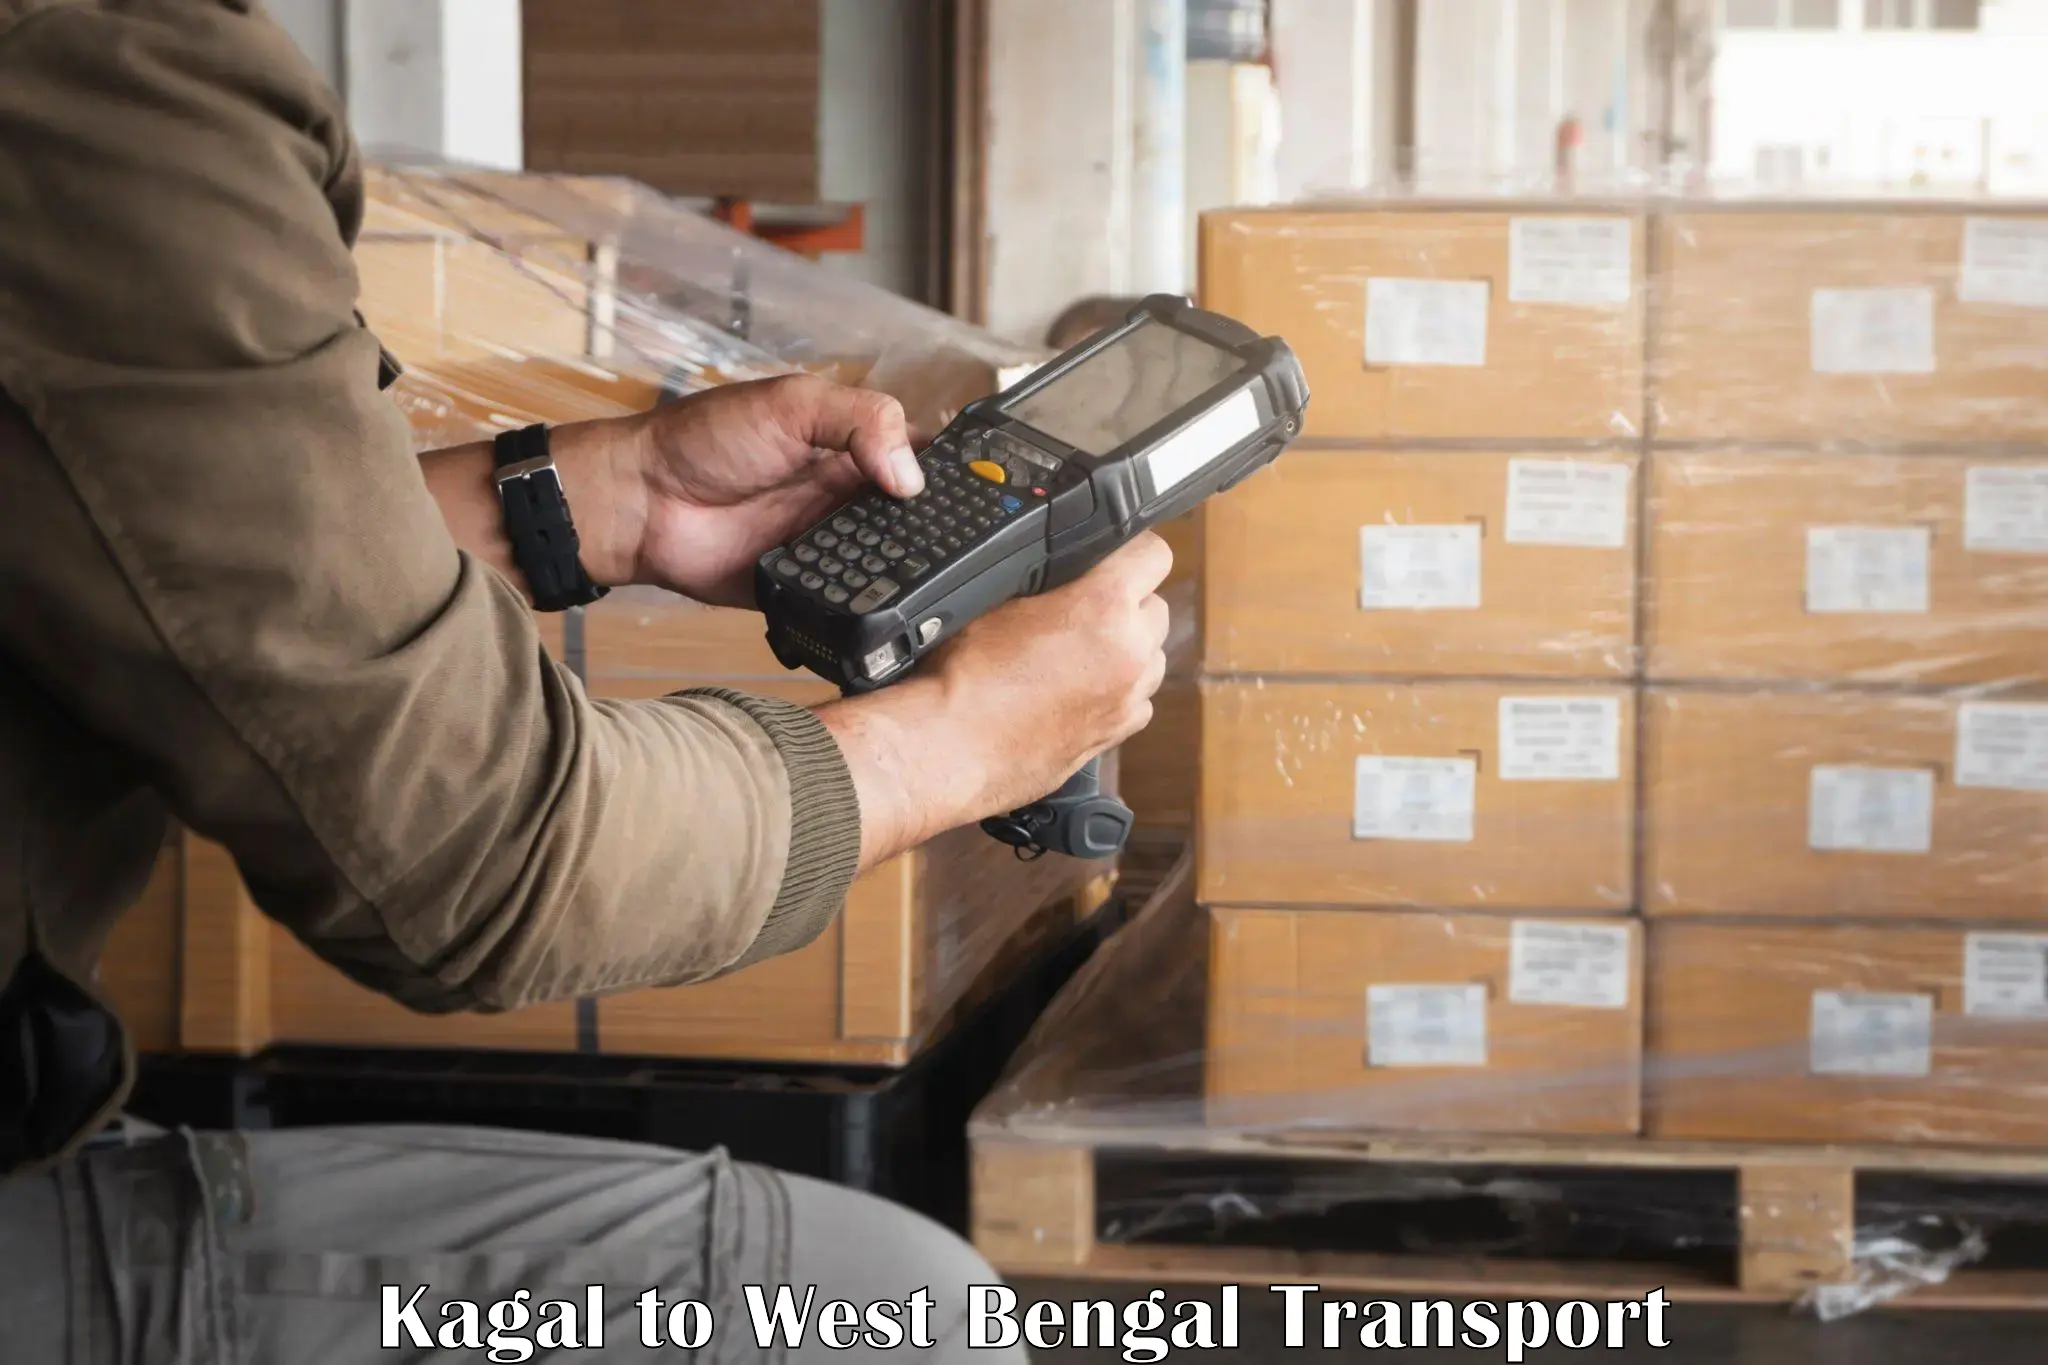 Online transport service Kagal to West Bengal